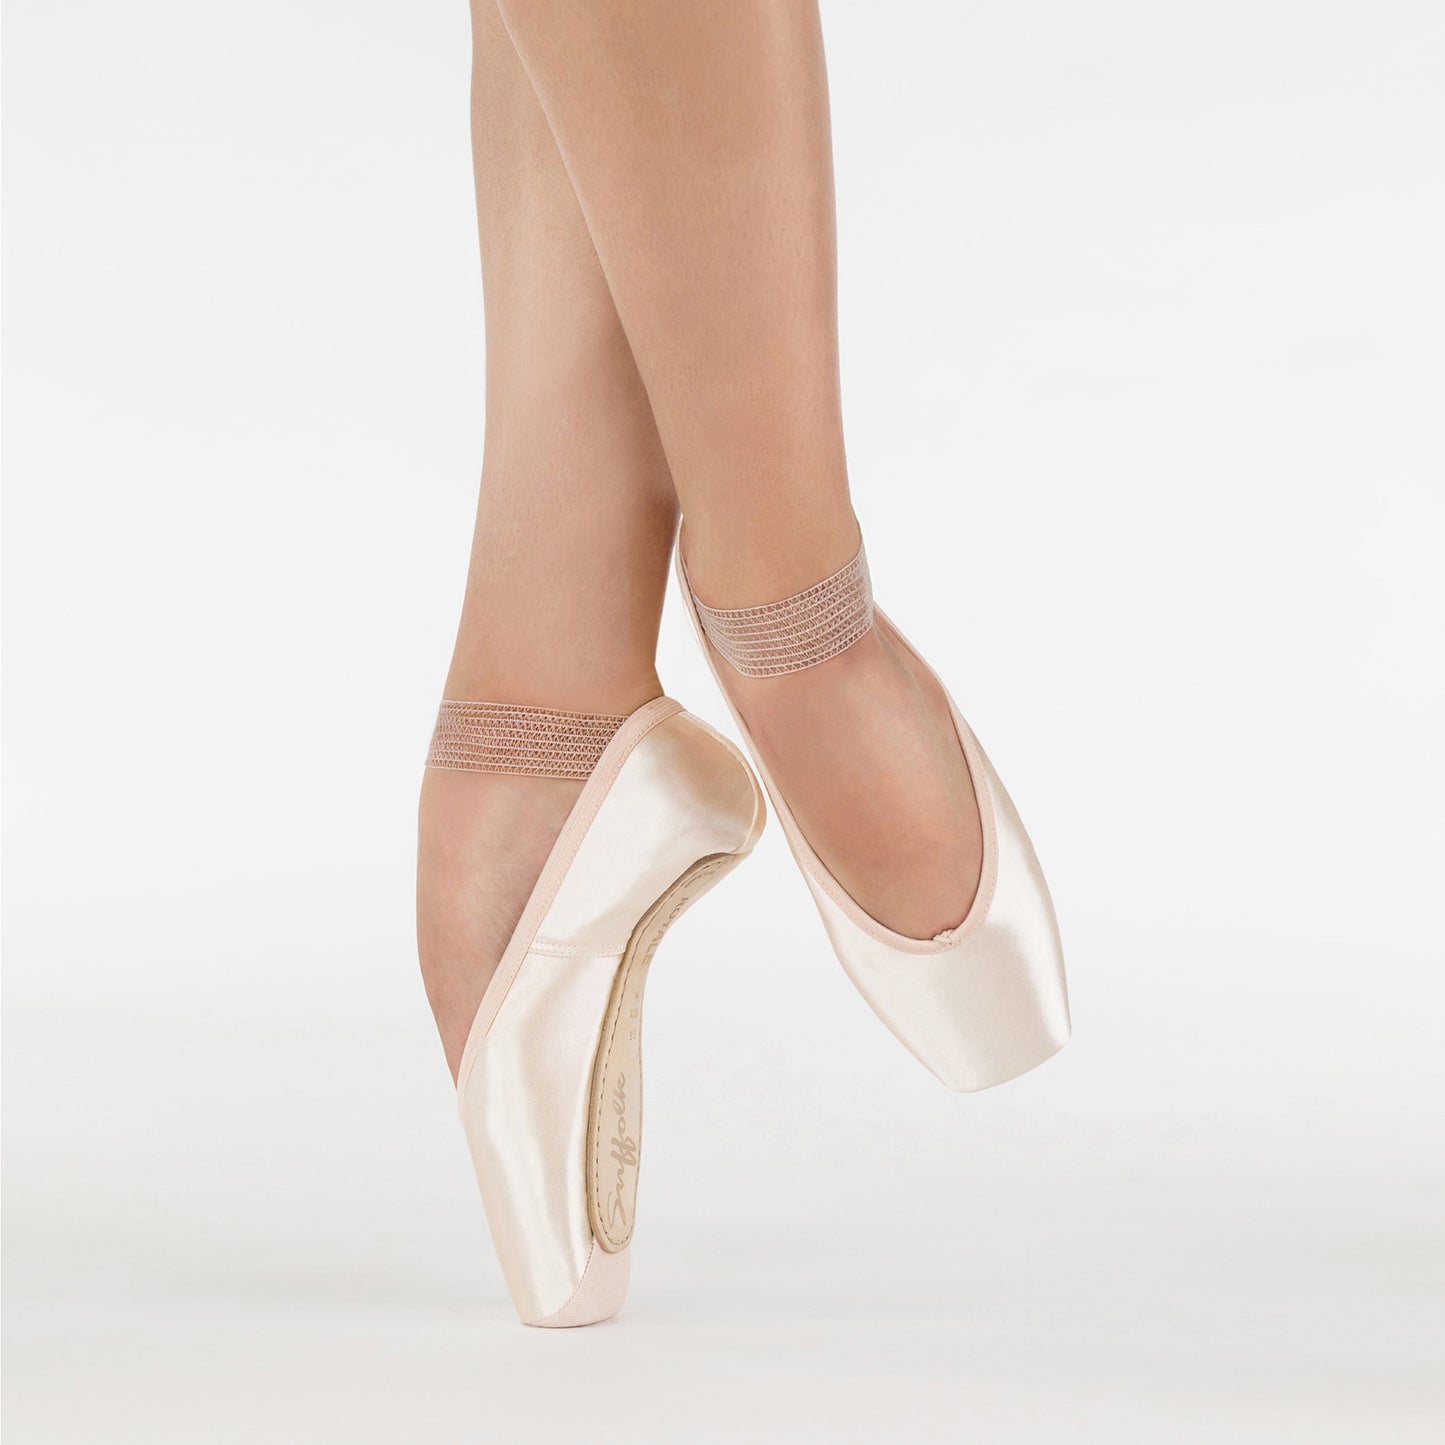 Suffolk Royale Pointe Shoes - Hard Shank